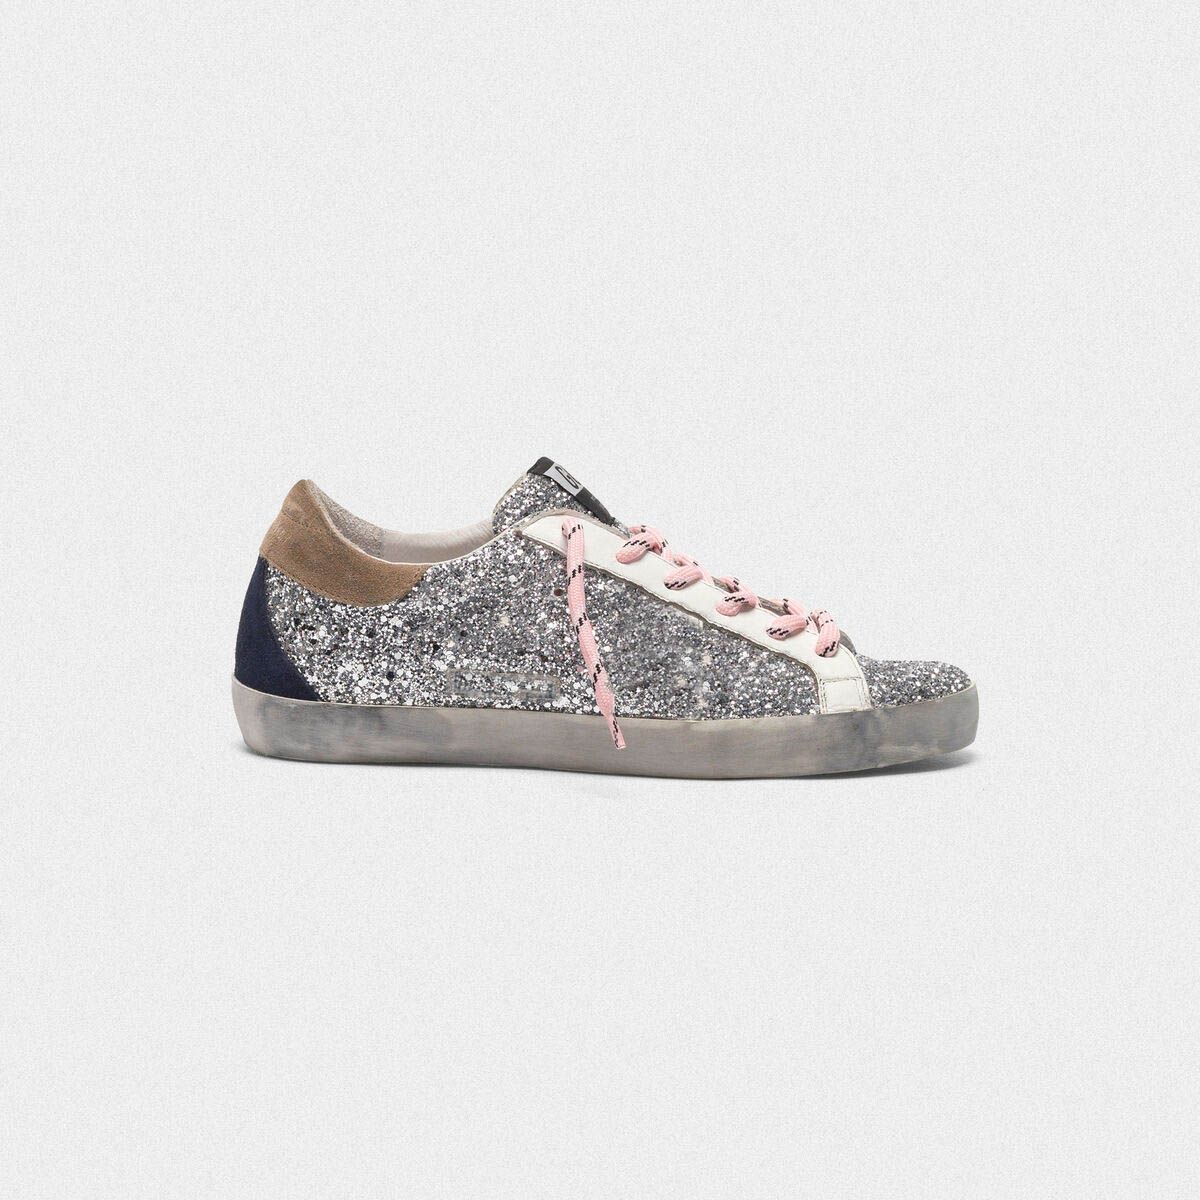 Golden Goose 2020 New Old Style Sneakers Genuine Leather Dermis Casual Shoes Mens And Women Trainer Shoes A60 Gucci518, $104.63 DHgate.Com